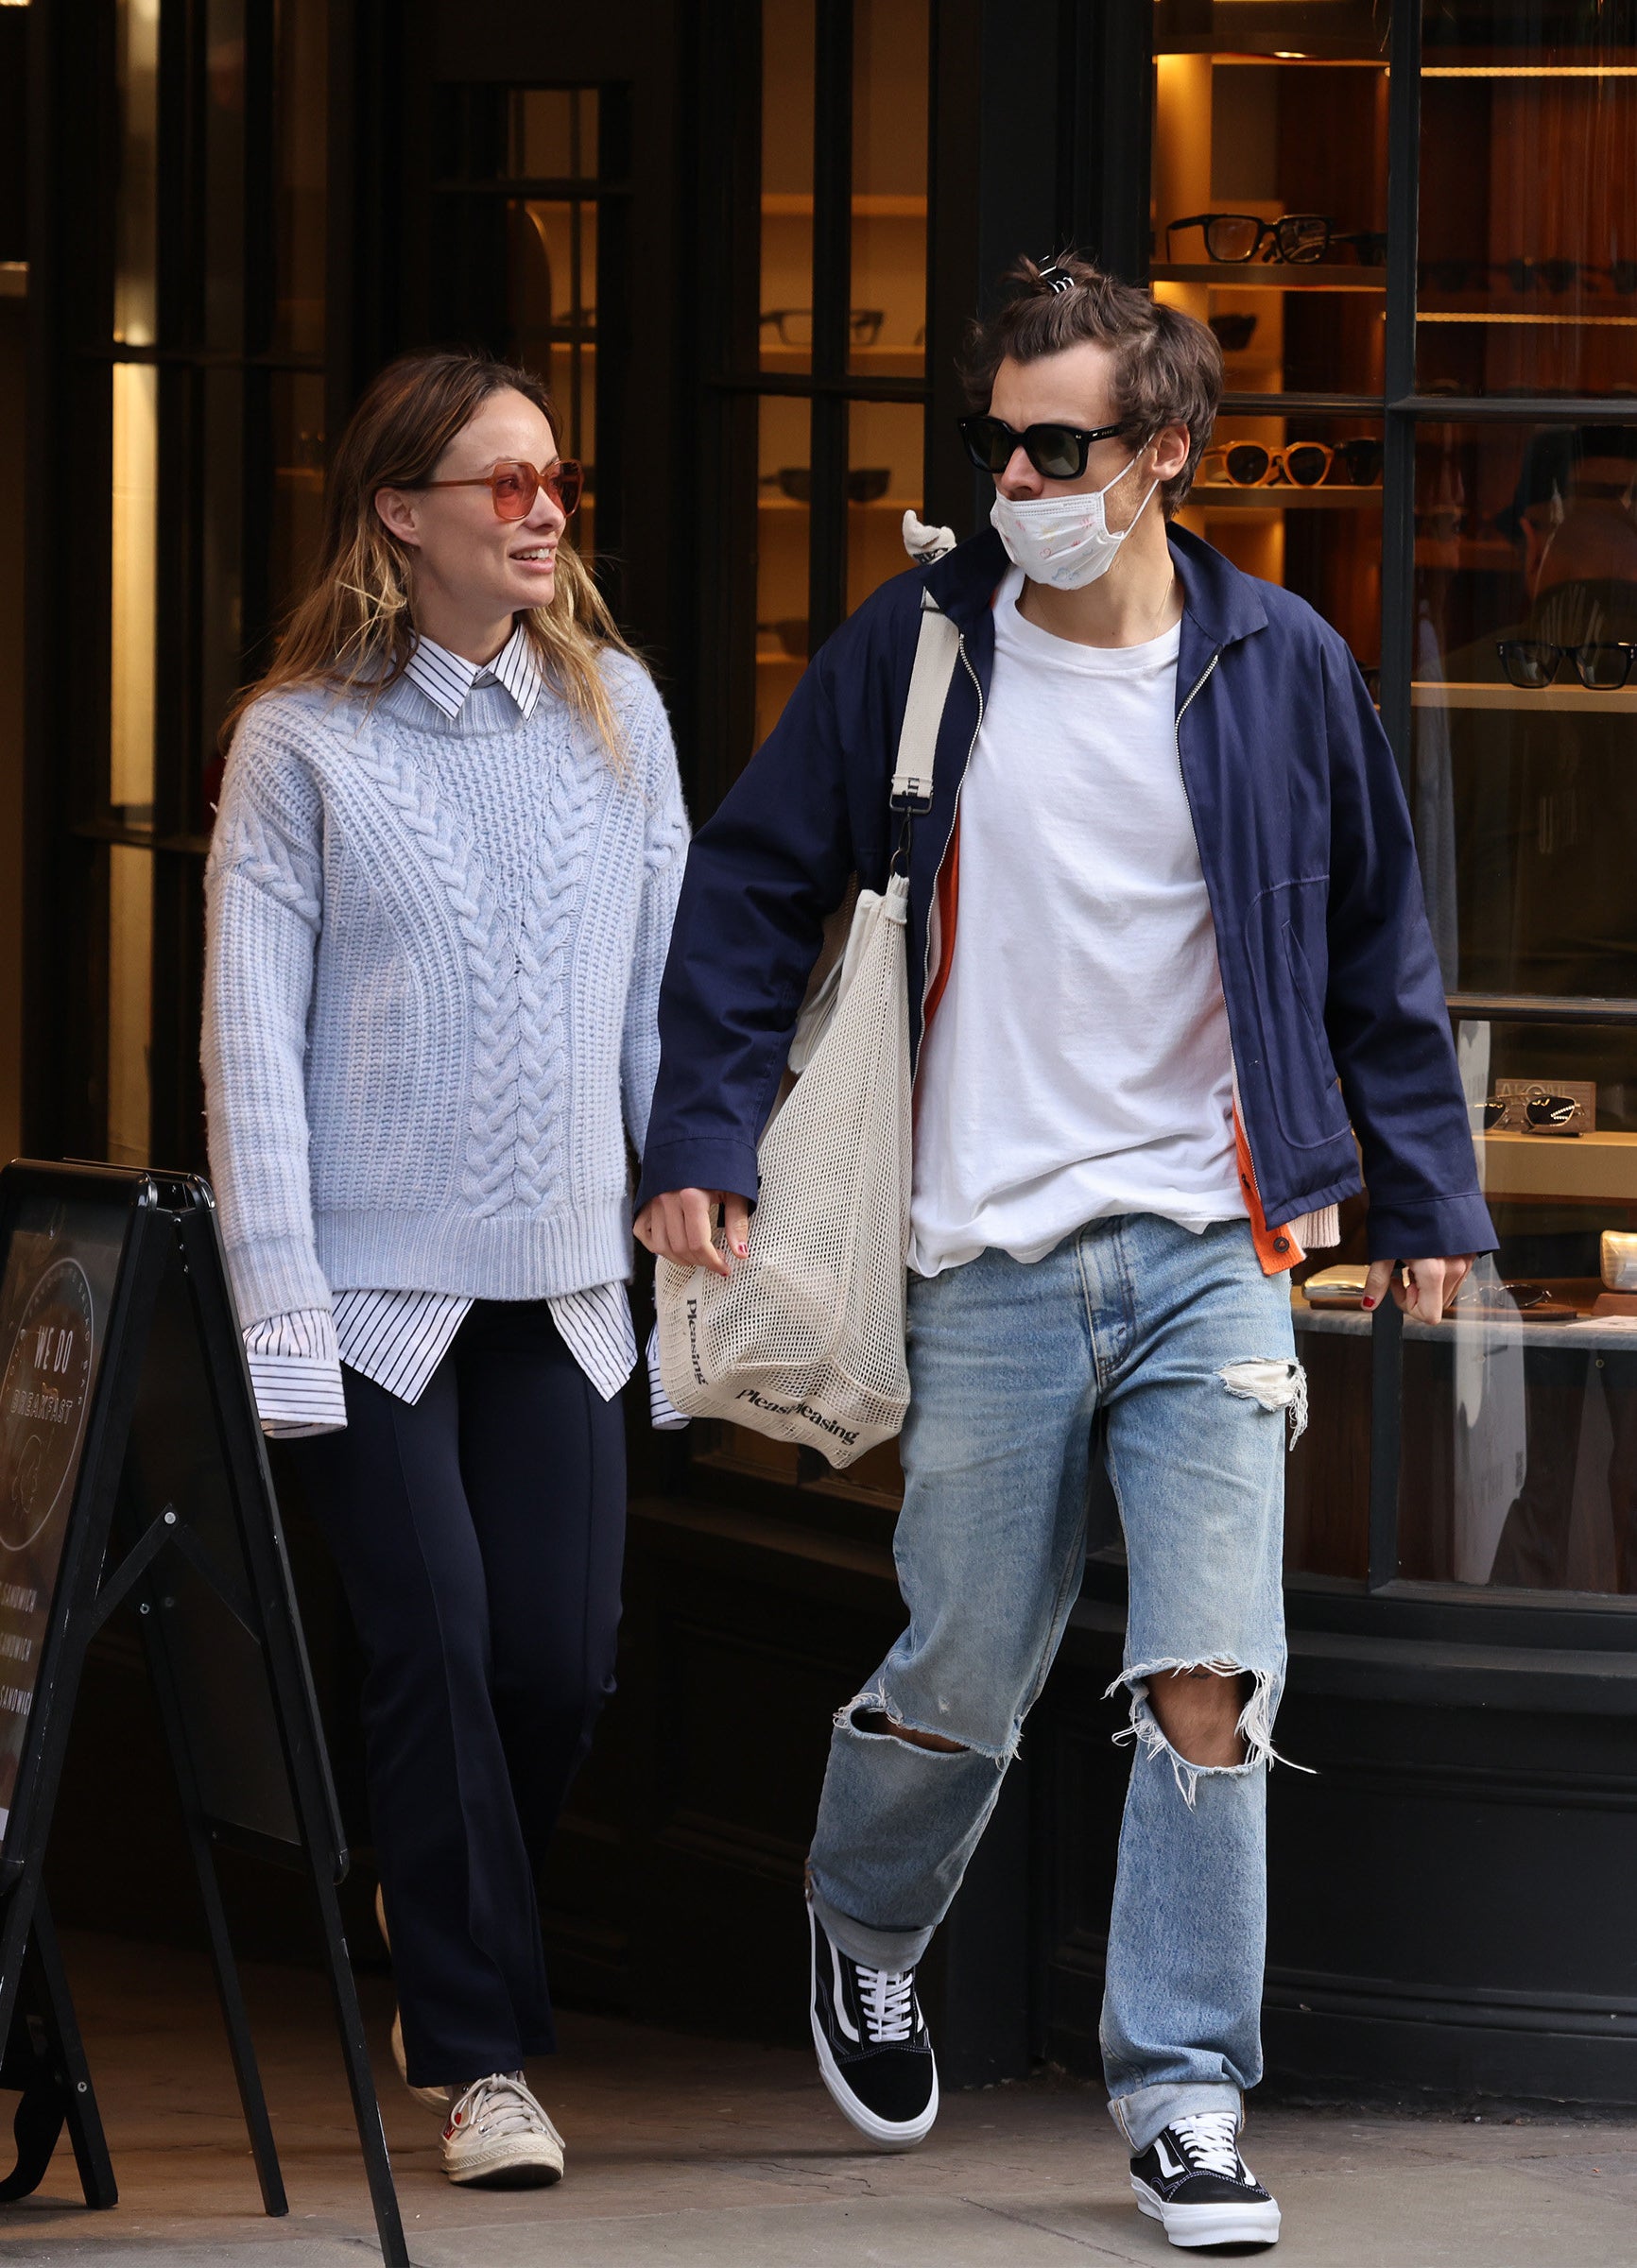 Harry Styles and Olivia Wilde leaving a restaurant